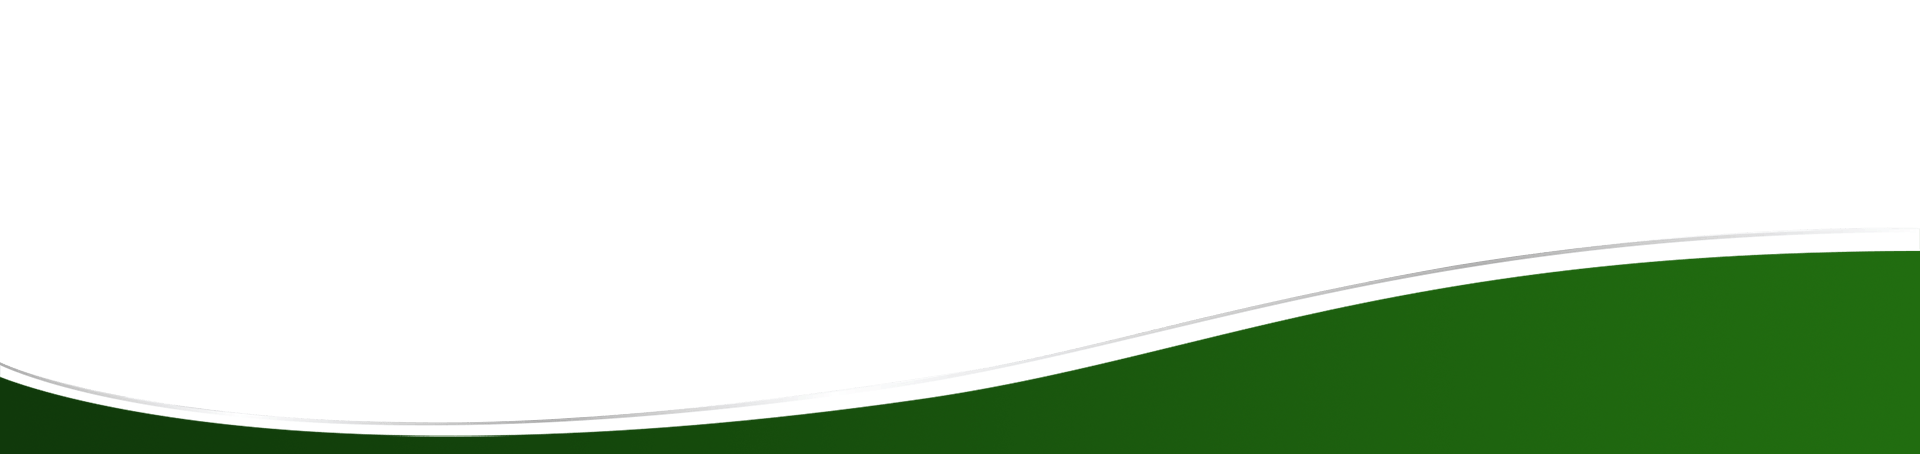 green footer background